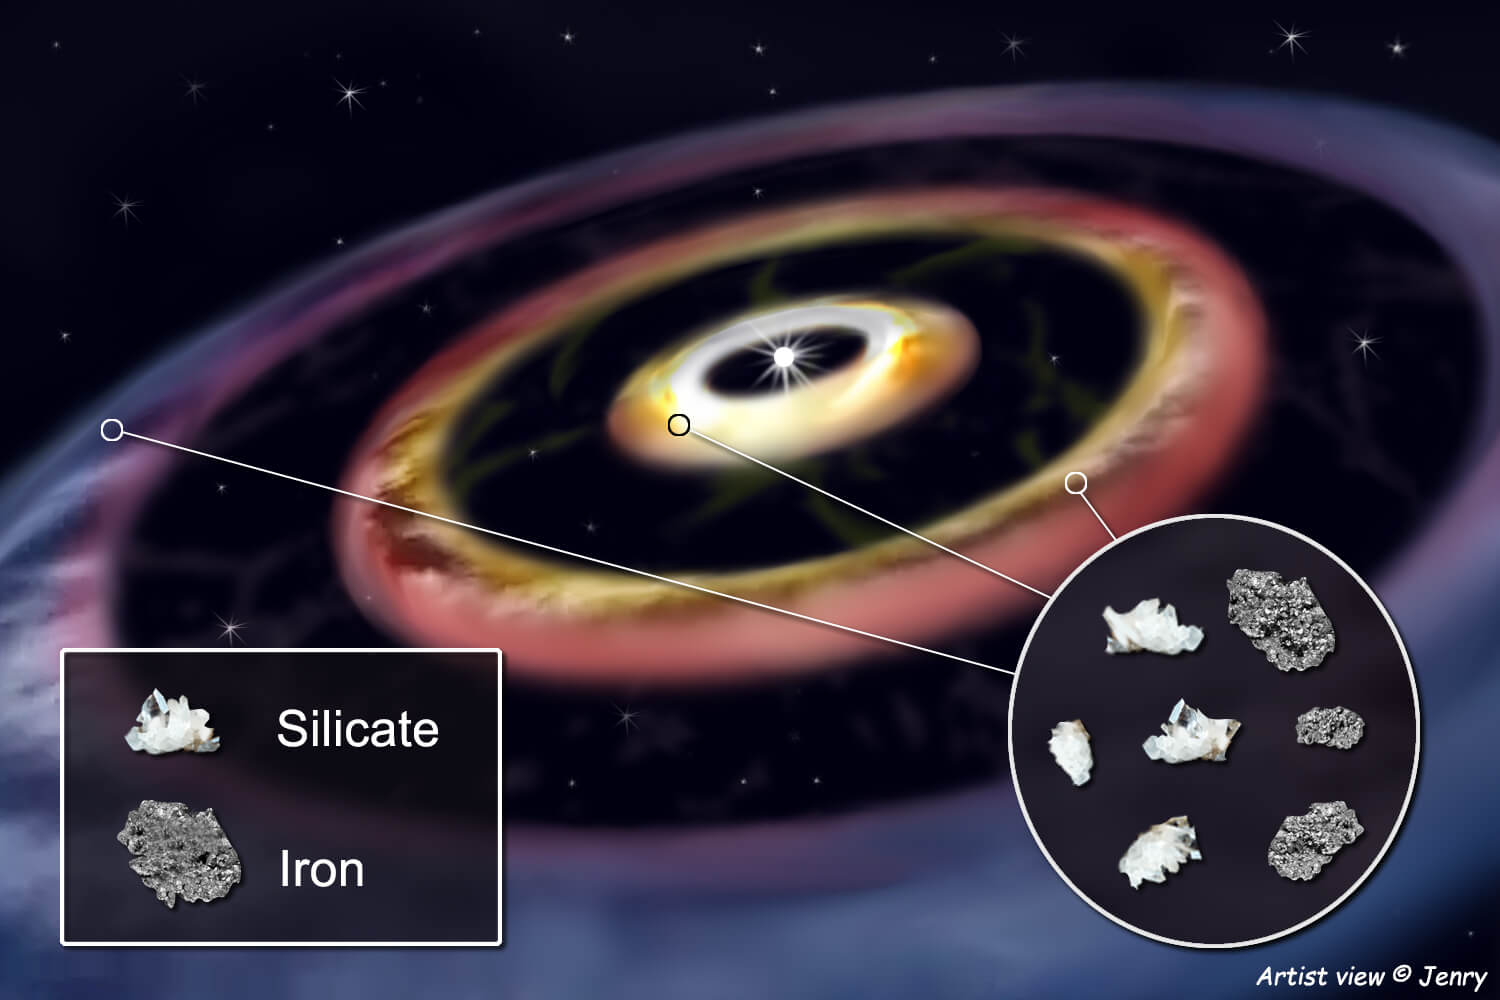 Hungarian-Led Intl Research Team Makes Discovery in Young Star's Planet-Forming Zone